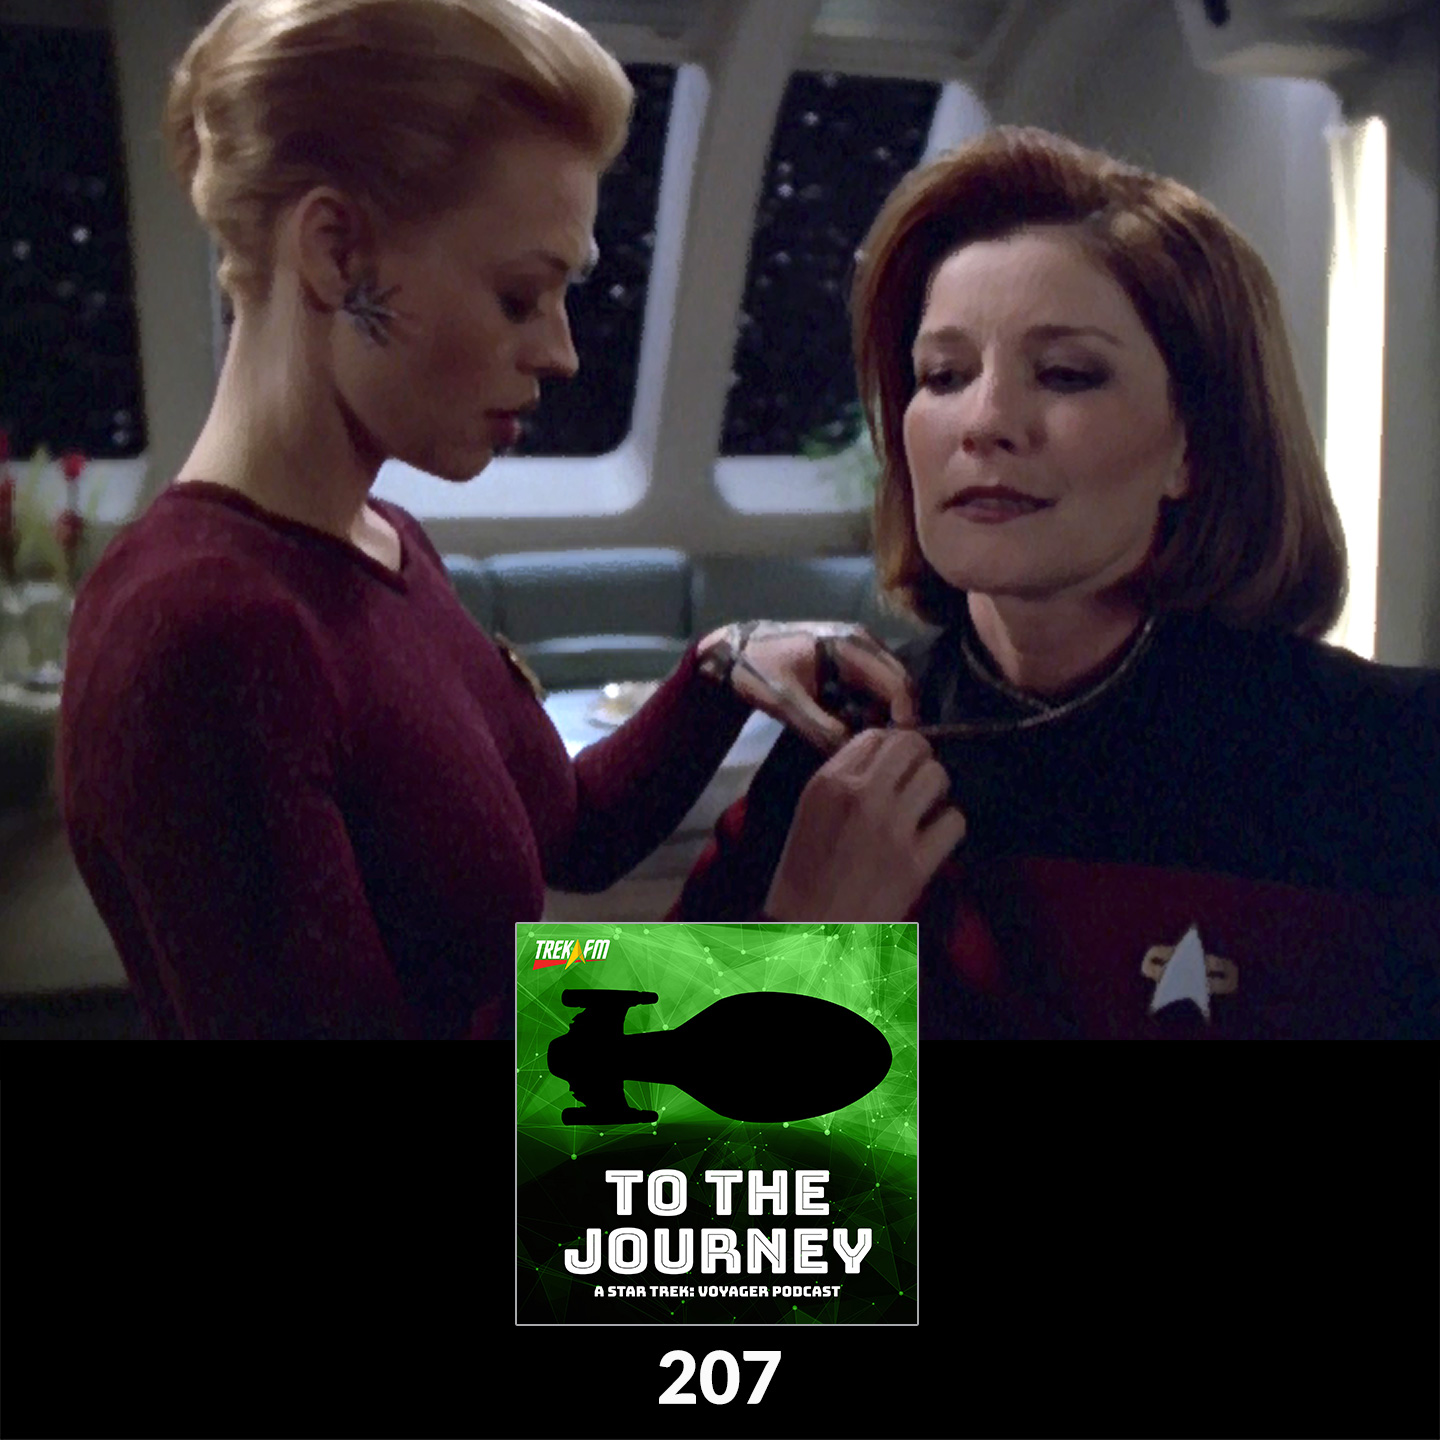 To The Journey 207: Puttin' On the Pipz - Favorite Captain Janeway / Seven of Nine Moments